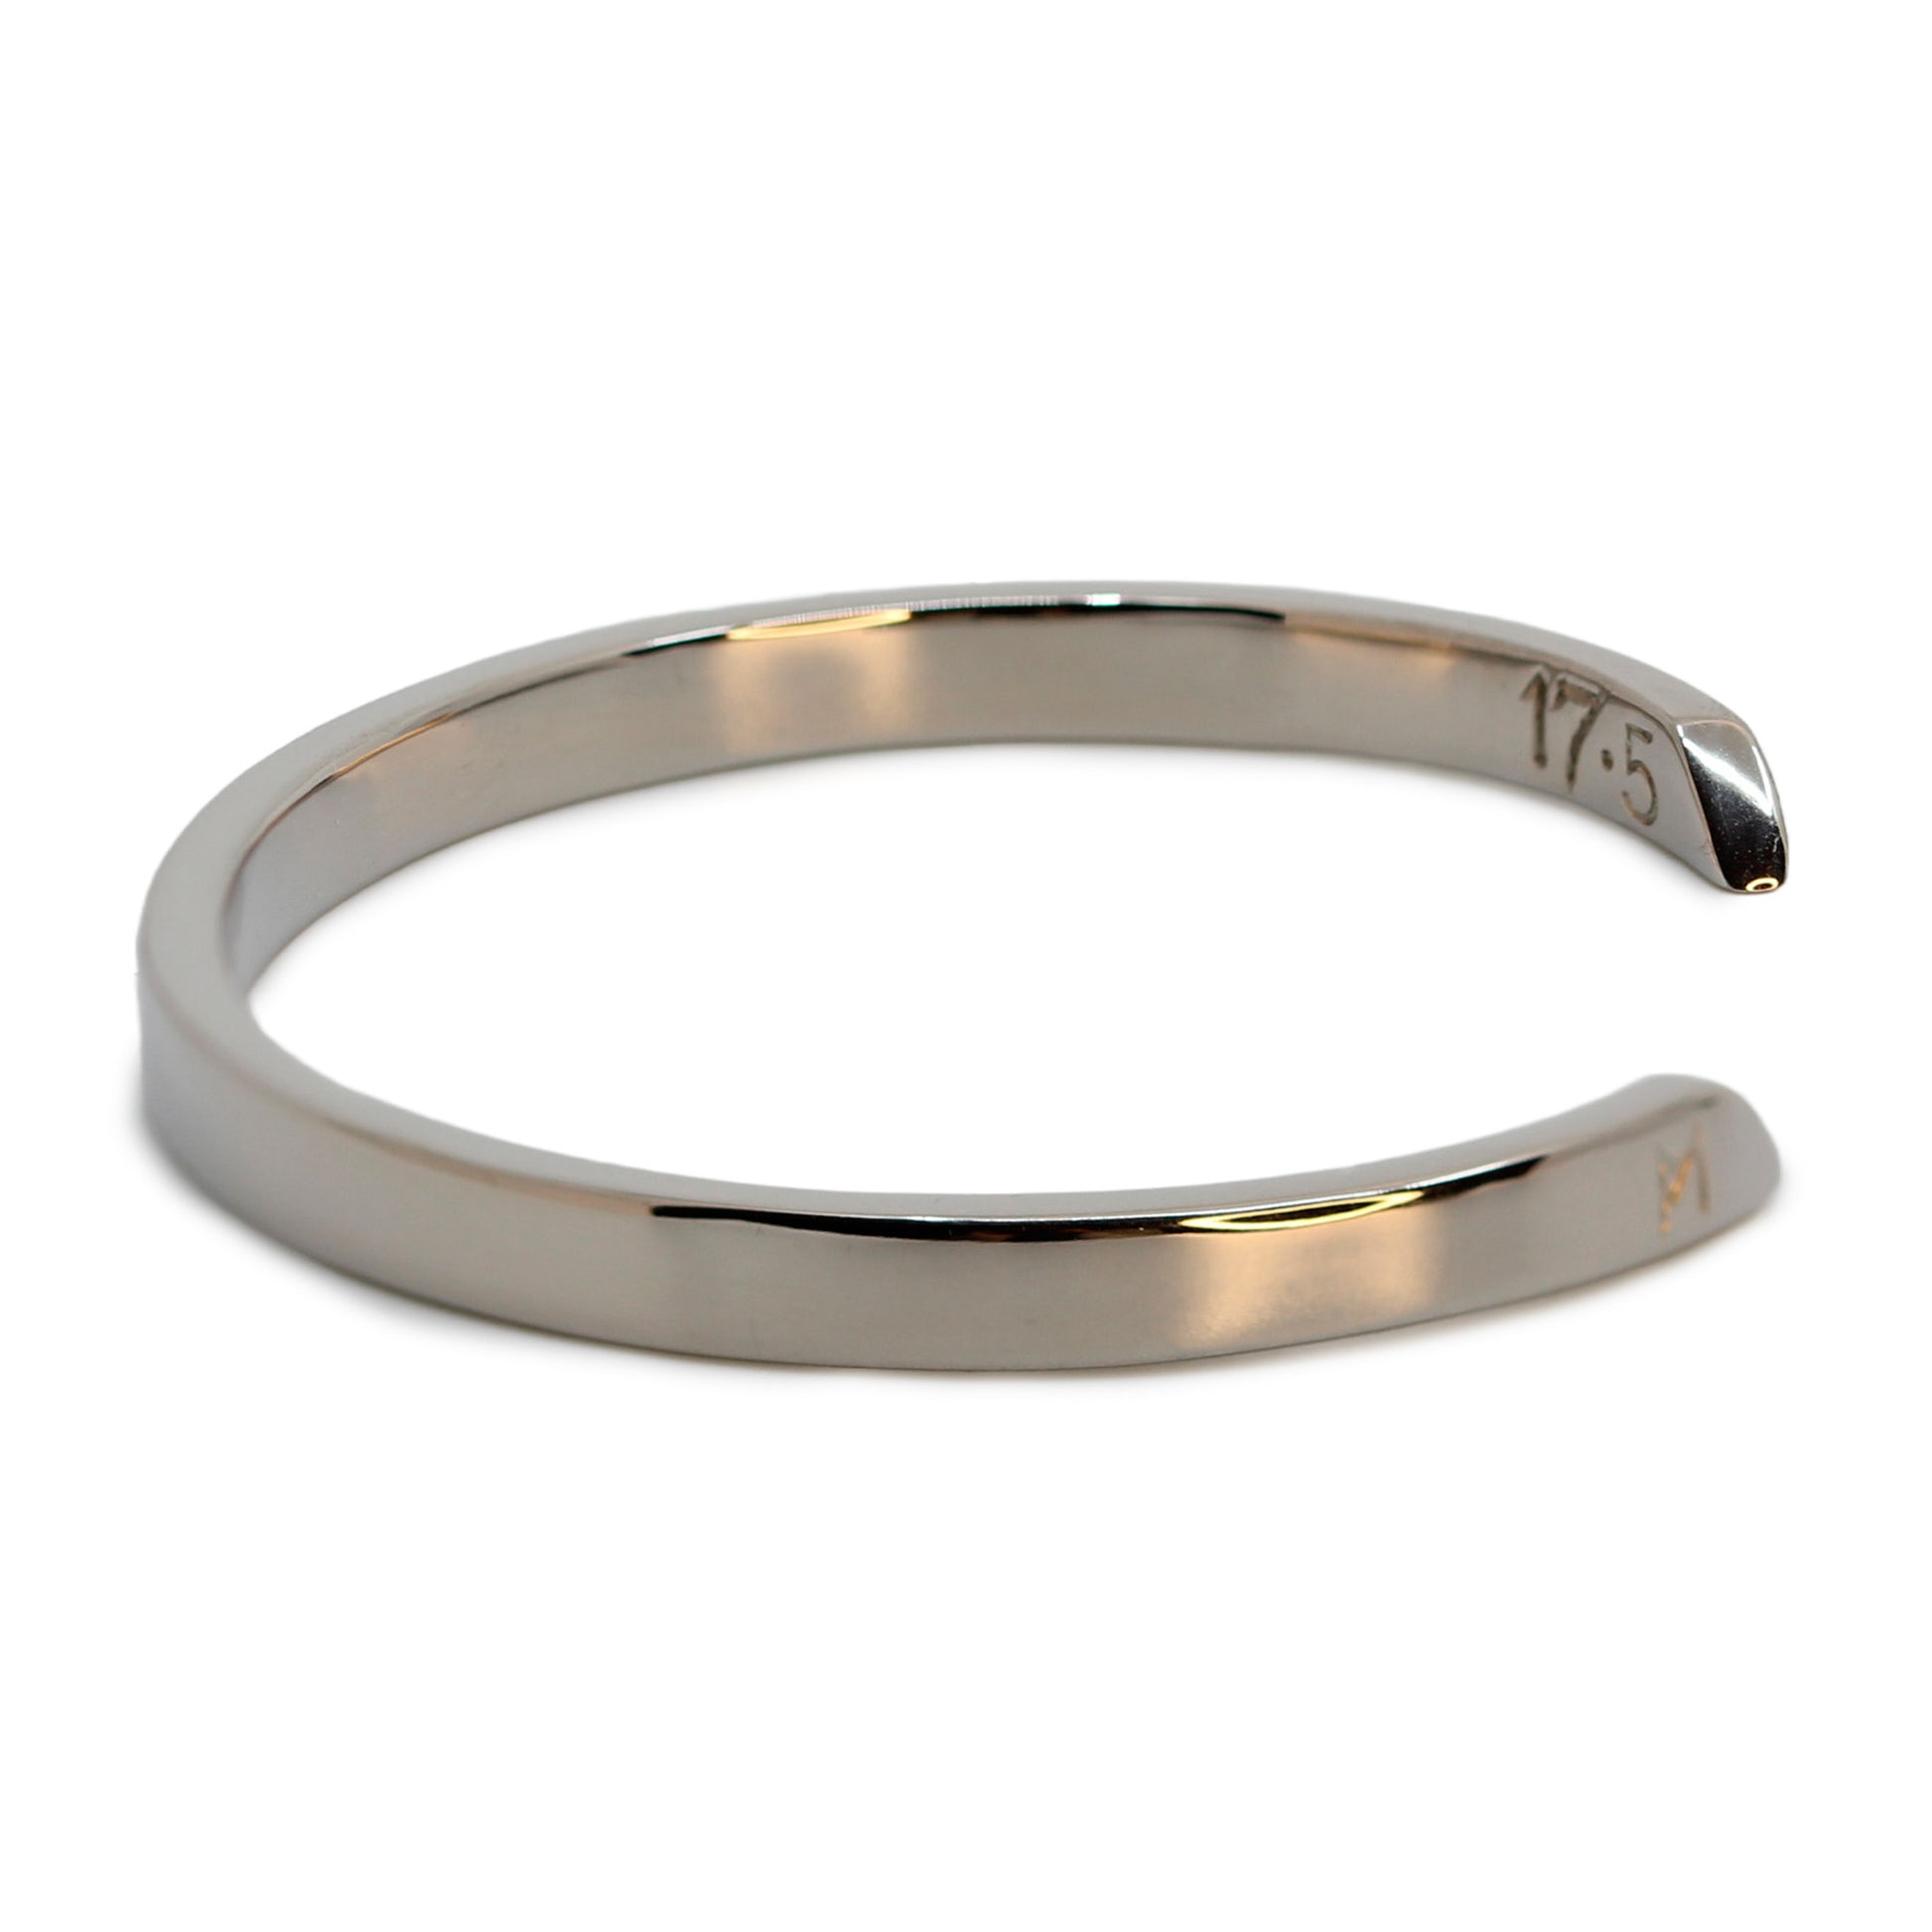 Single silver-colored titanium bangle, 5 mm wide. Image shows side view of bangle.